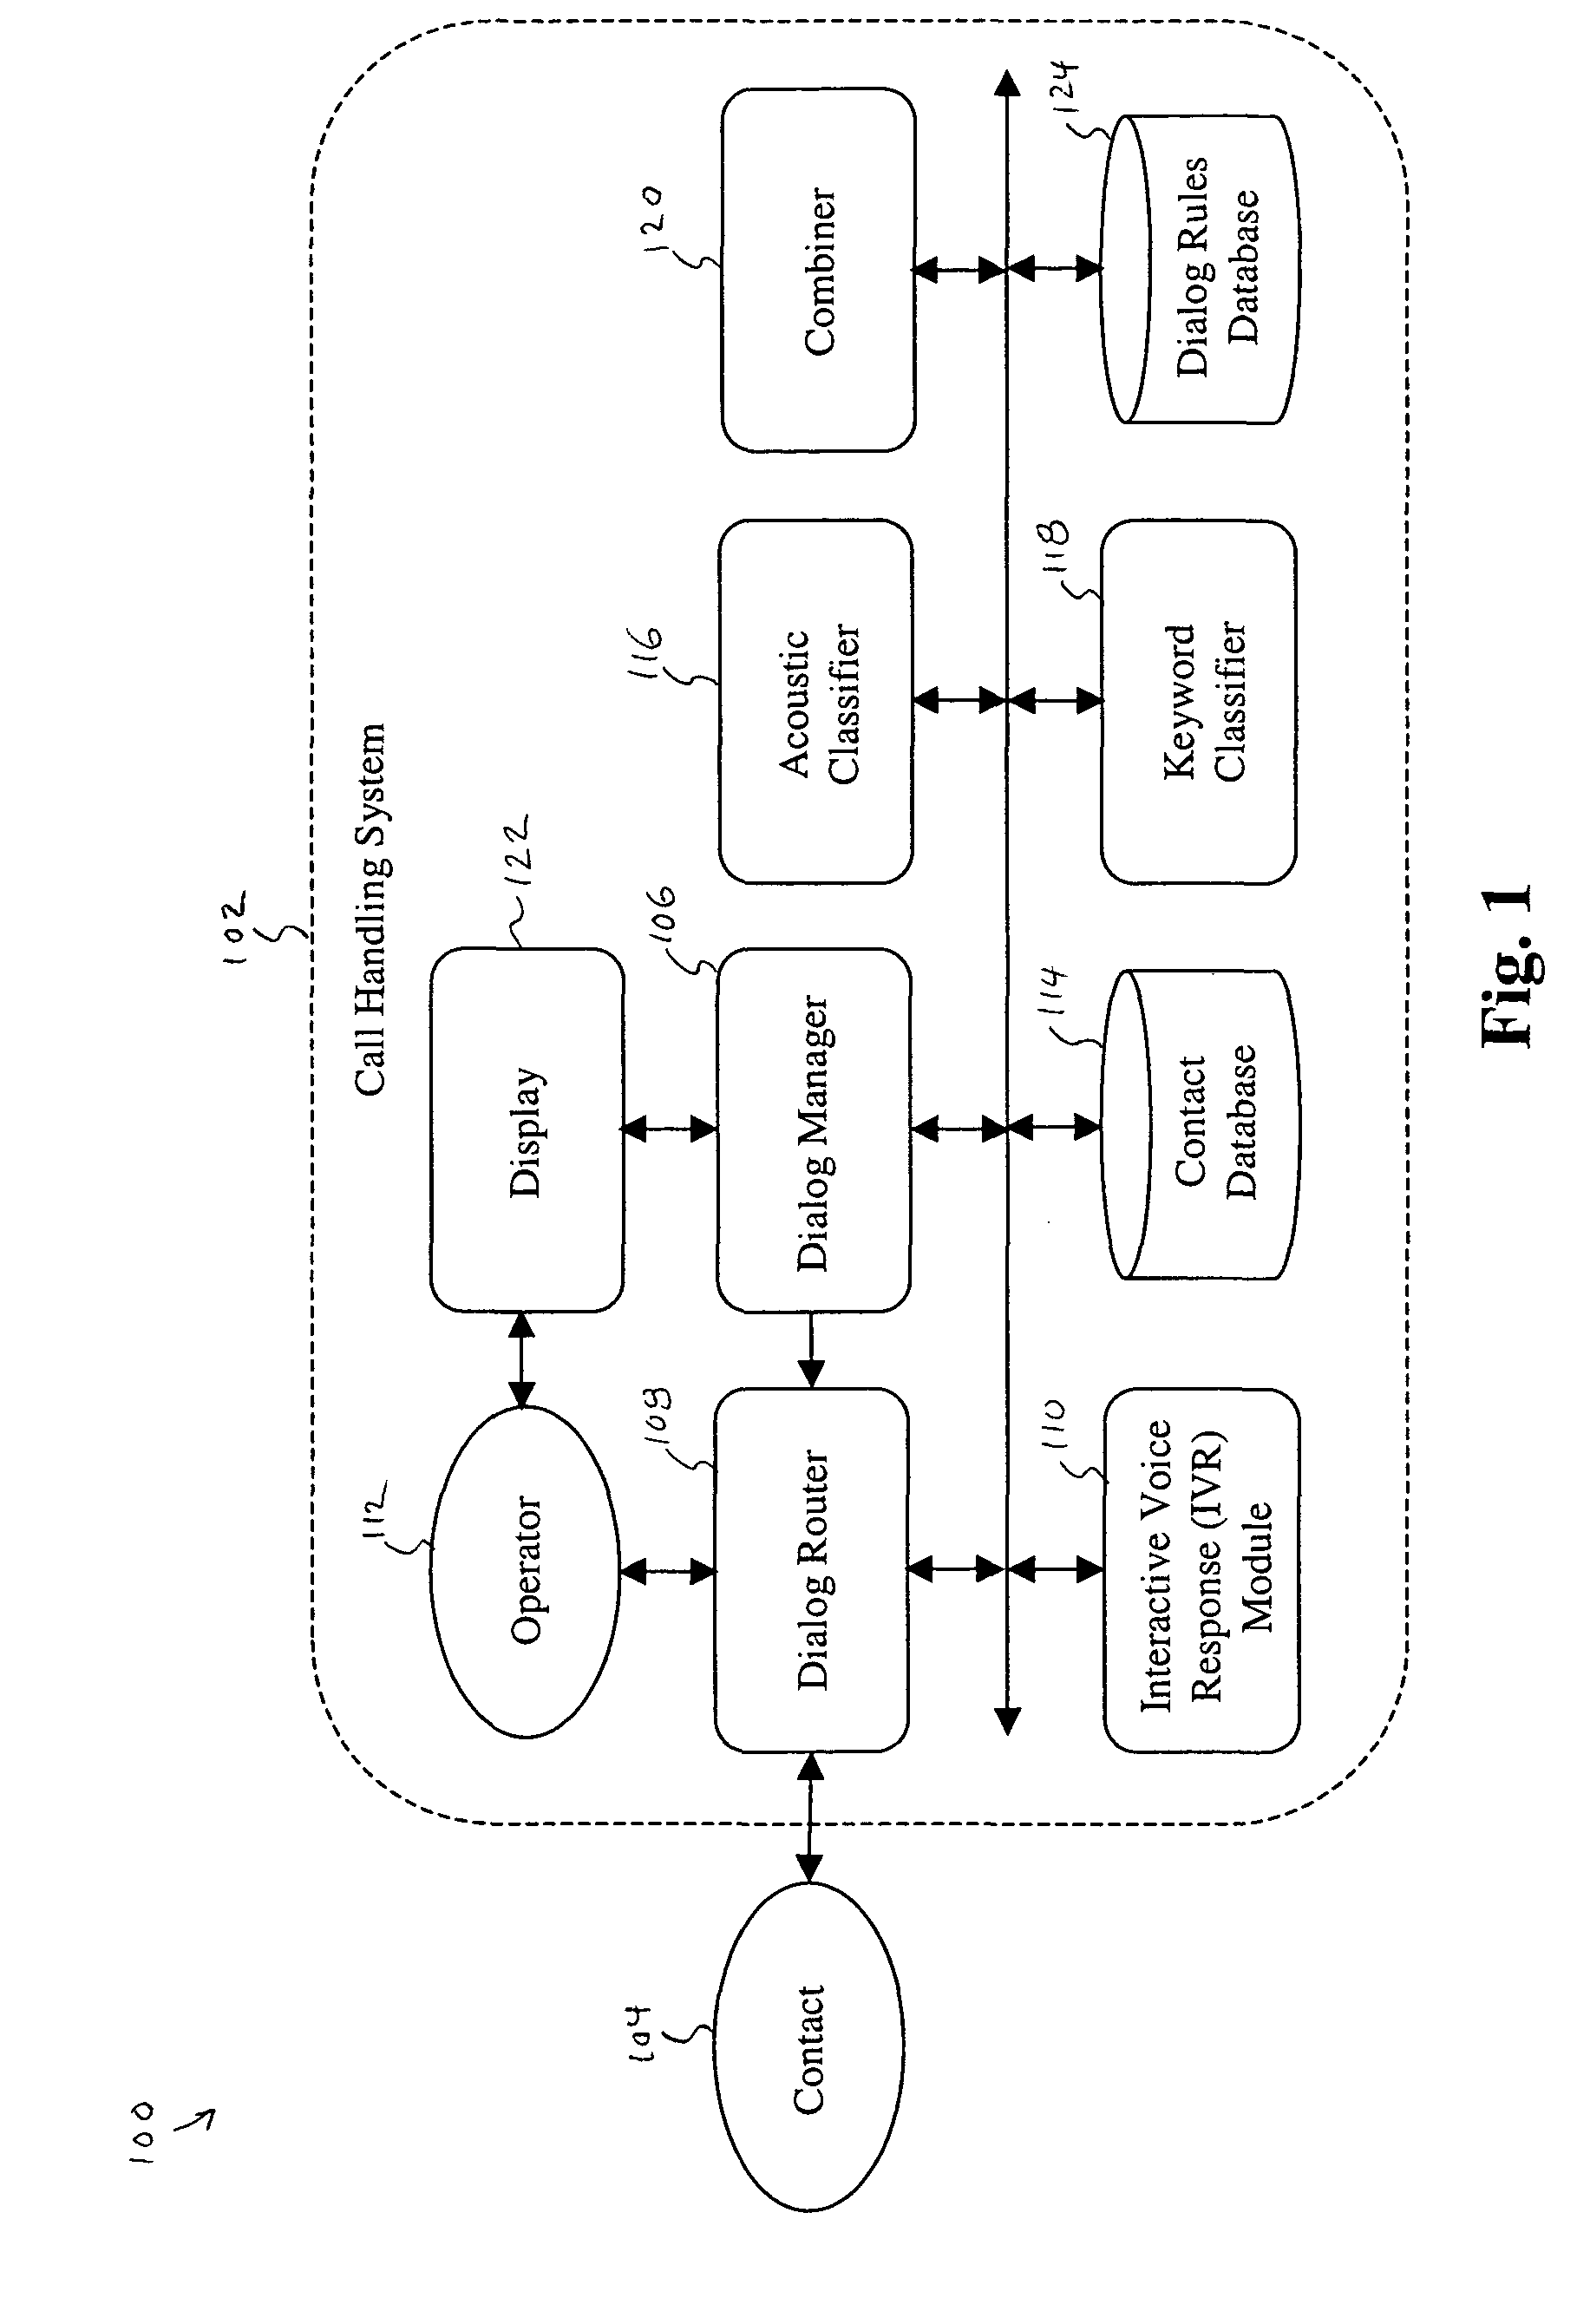 System and method for dialog management within a call handling system